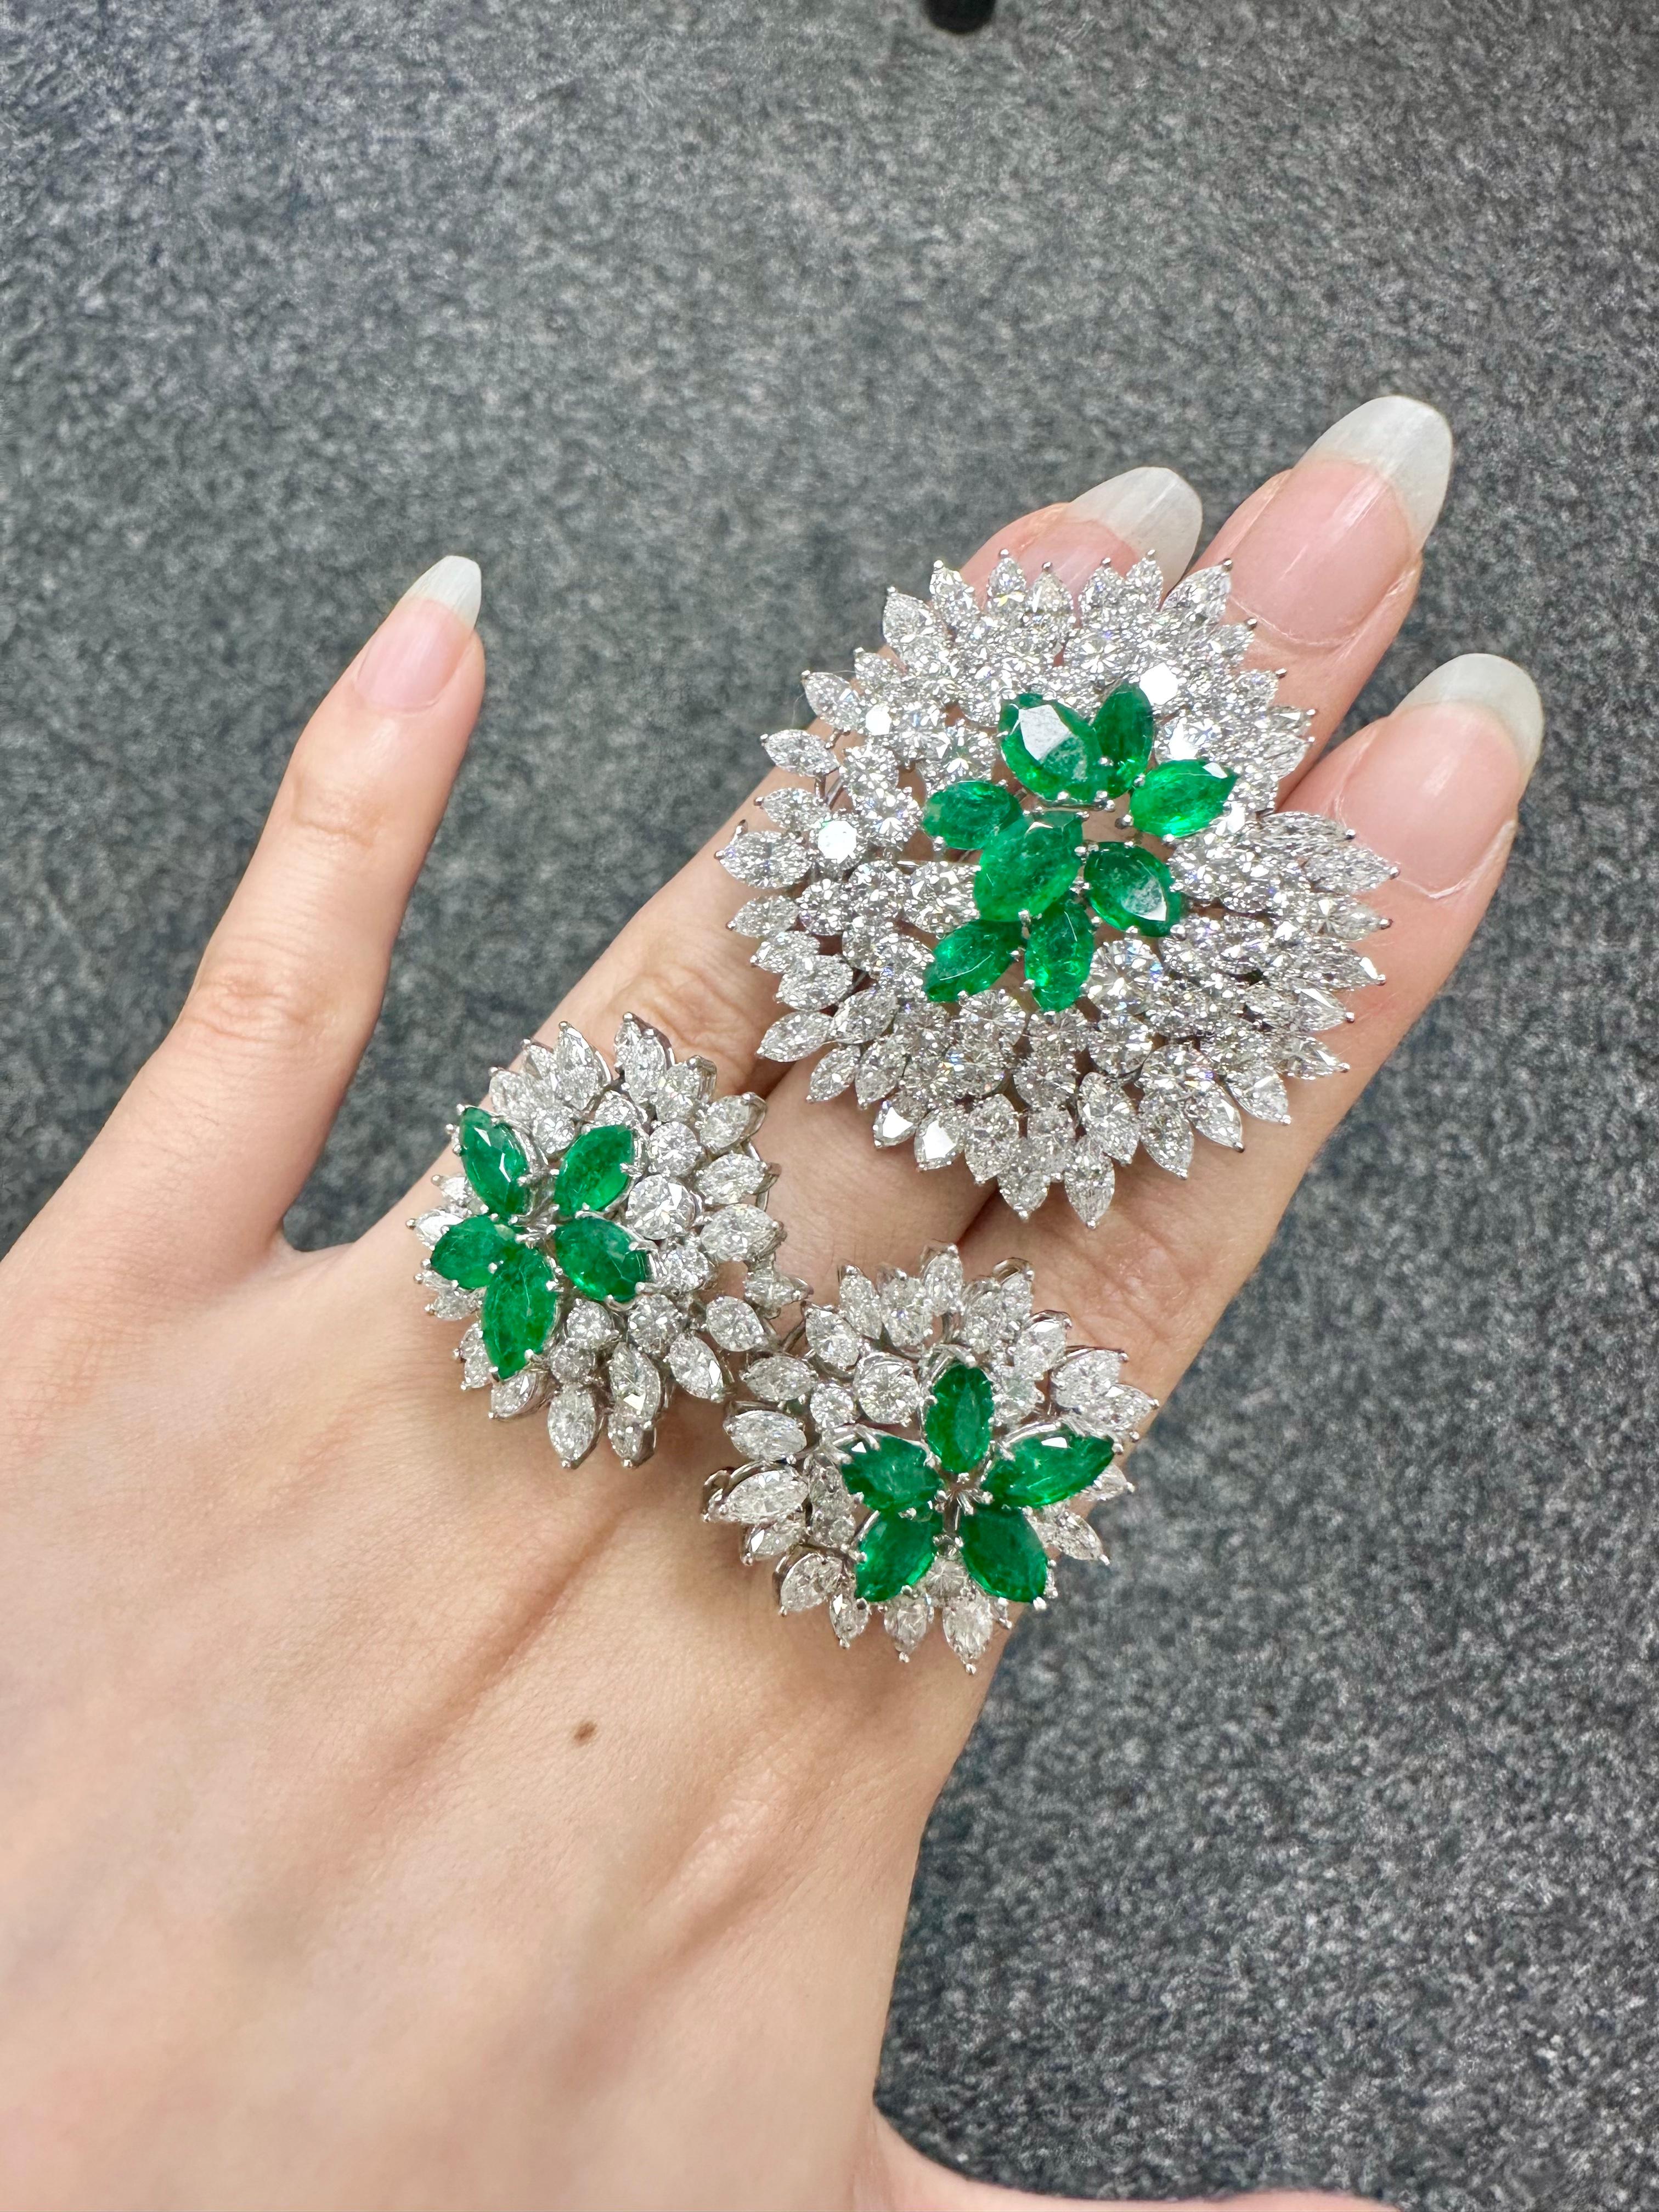 This magnificent emerald diamond brooch and earrings set from the London jeweller David Morris are presented with original packaging and paperwork. Vibrant marquise emeralds and natural white diamonds make for a thrilling combination in this